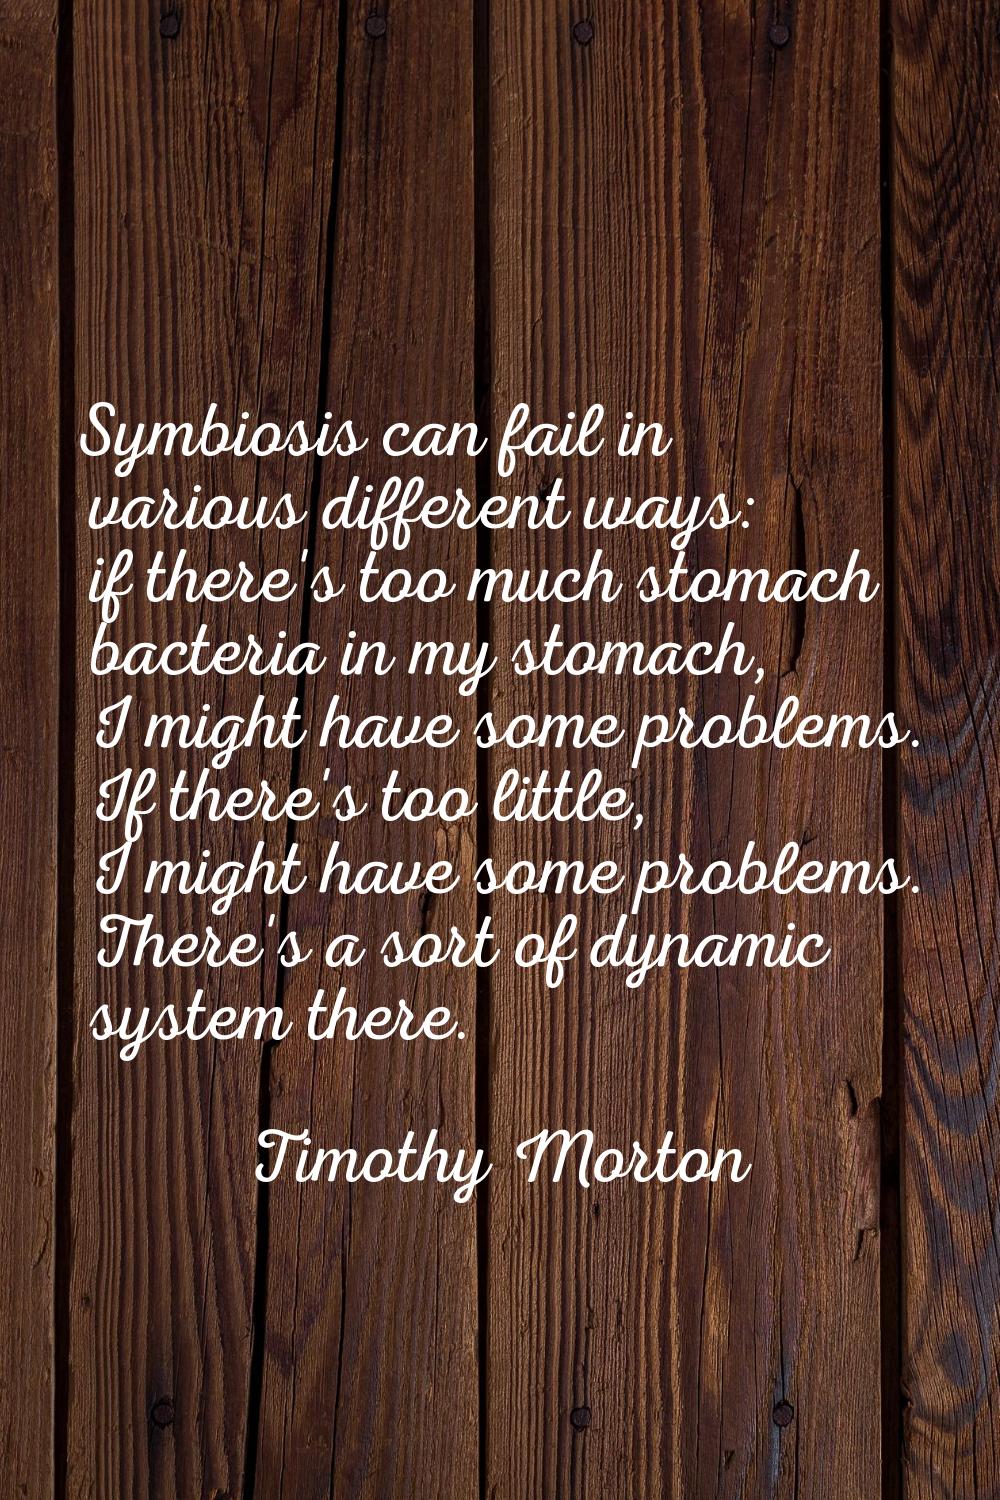 Symbiosis can fail in various different ways: if there's too much stomach bacteria in my stomach, I